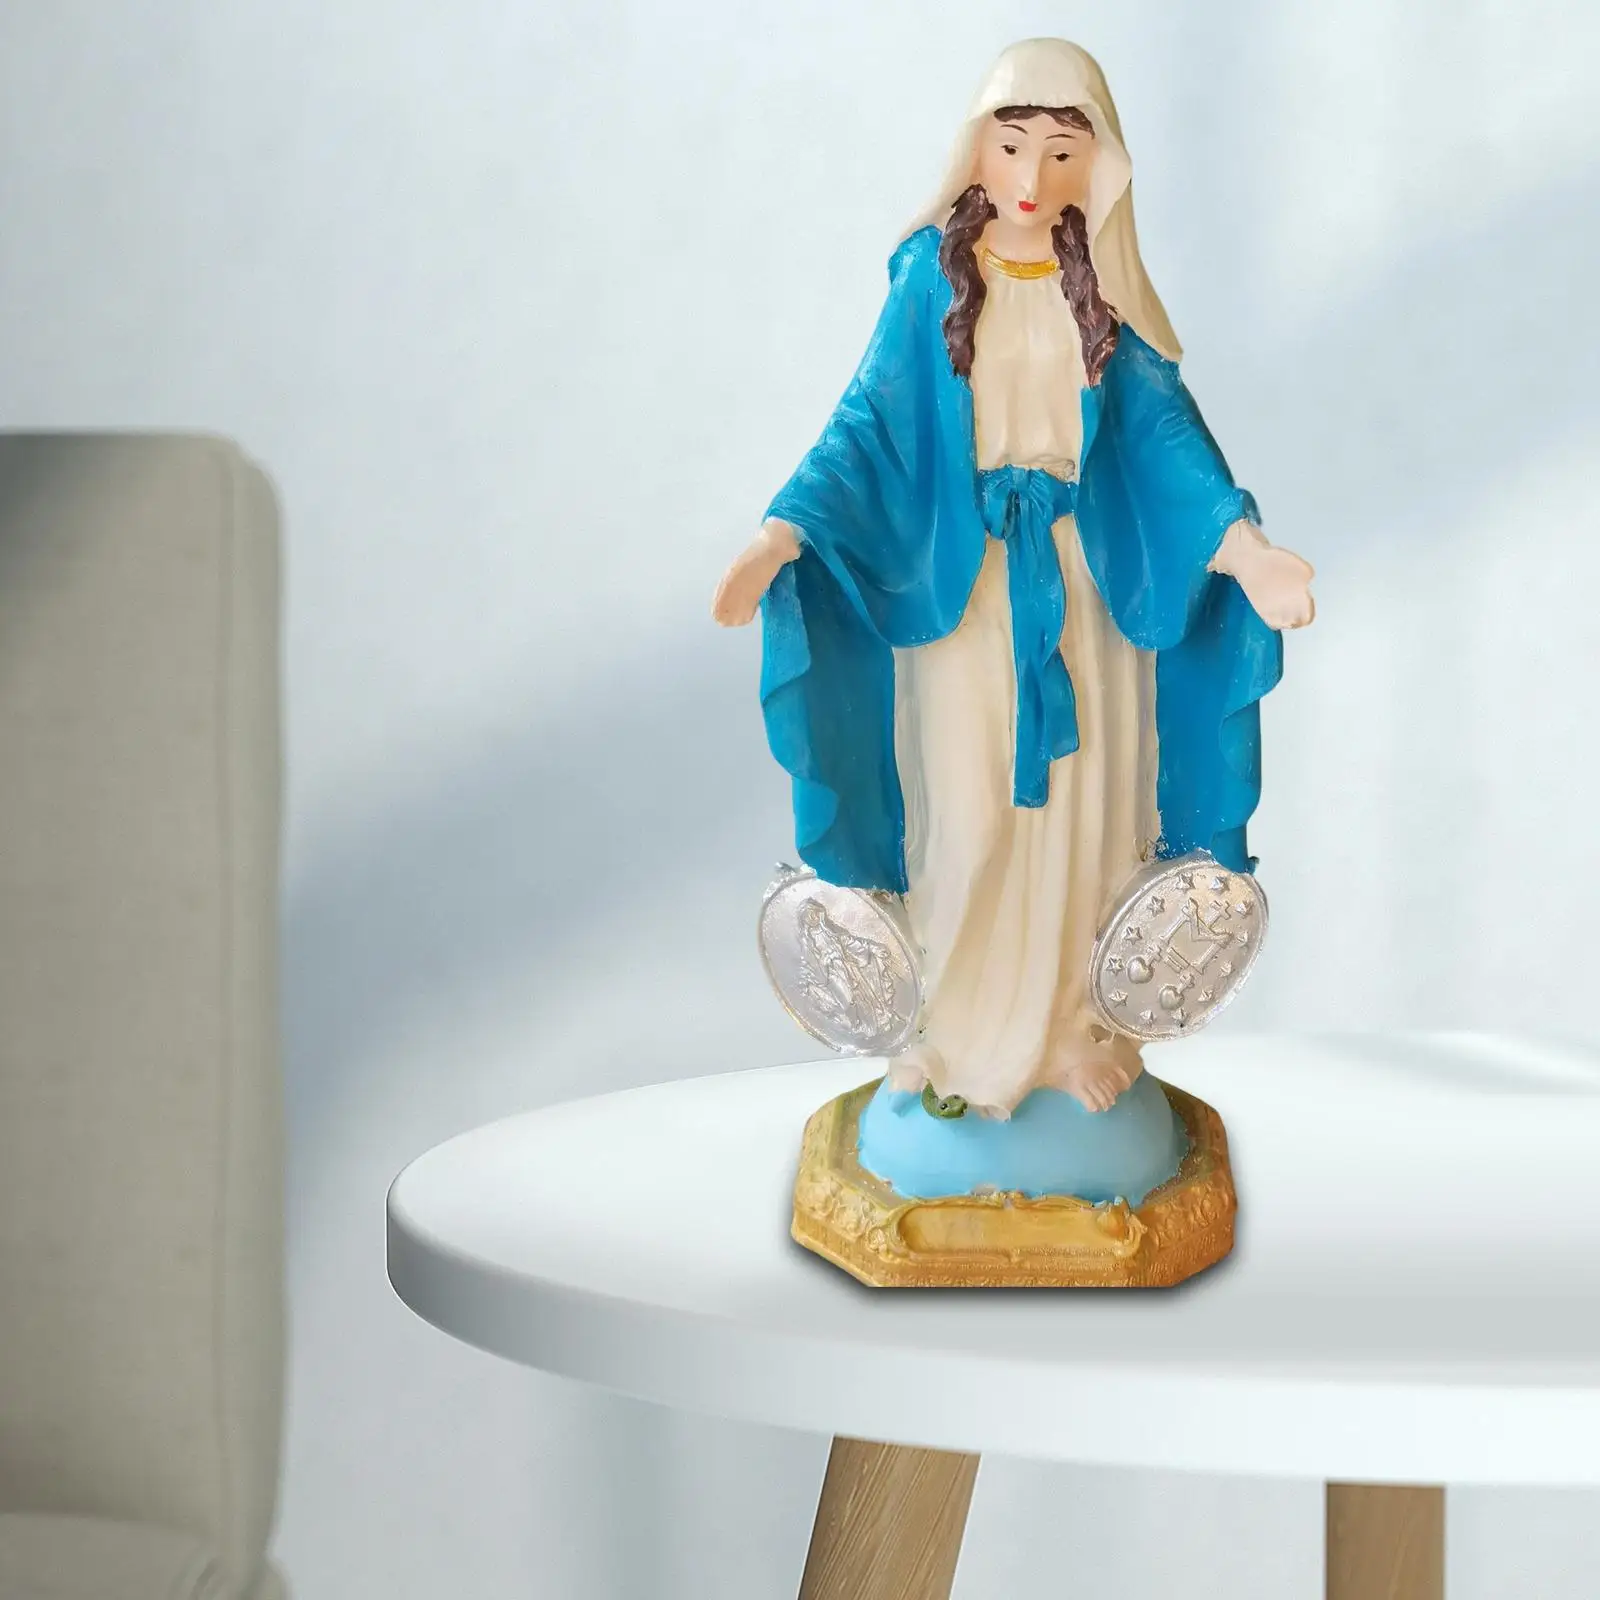 Virgin Mary Figurine Statue Resin Figurine Our Lady of Grace Figure On Base for Decoration